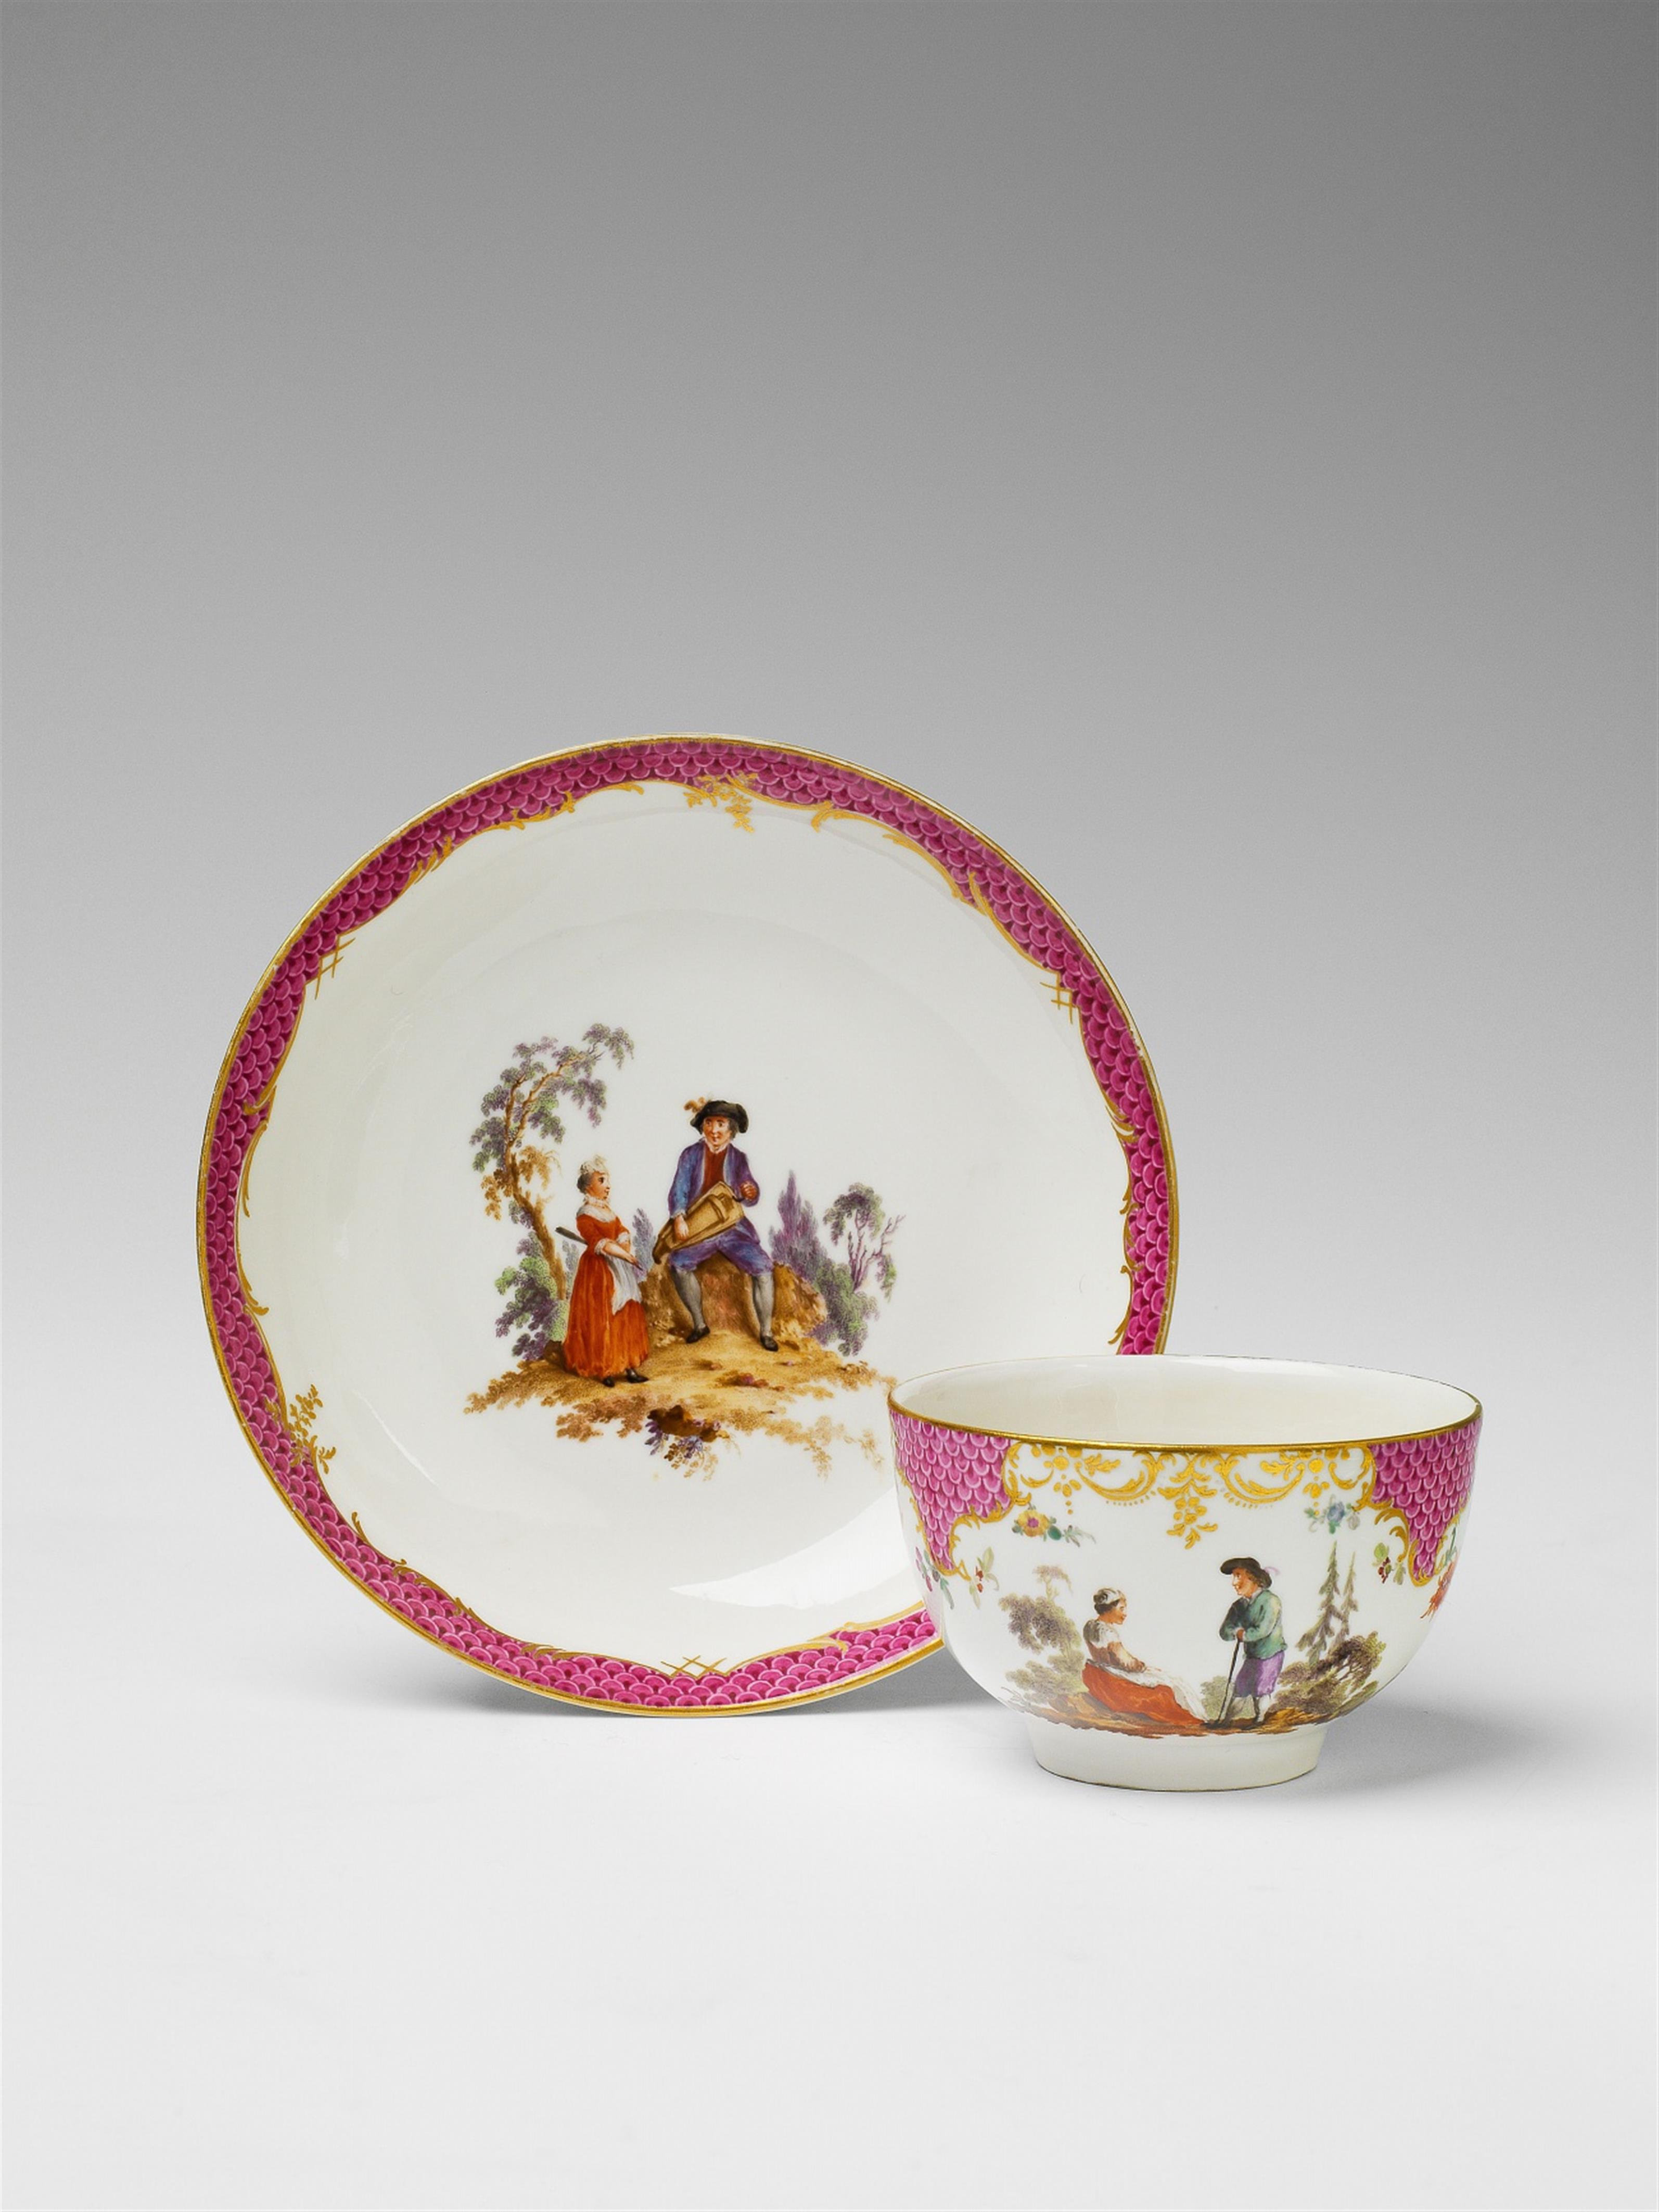 A Berlin KPM porcelain teacup and saucer with scenes after Teniers - image-1